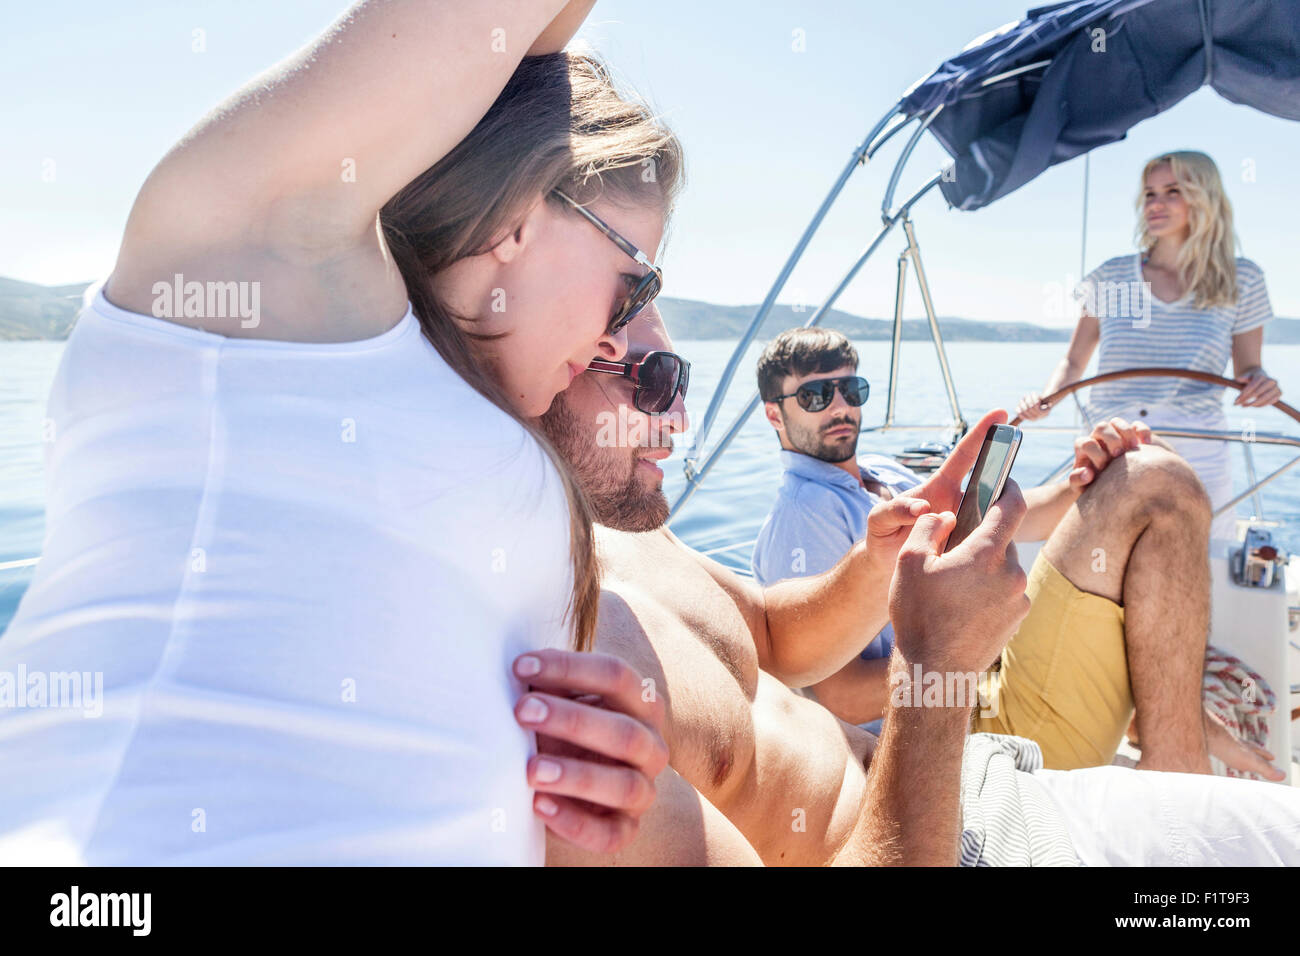 Group of friends text messaging on sailboat, Adriatic Sea Stock Photo